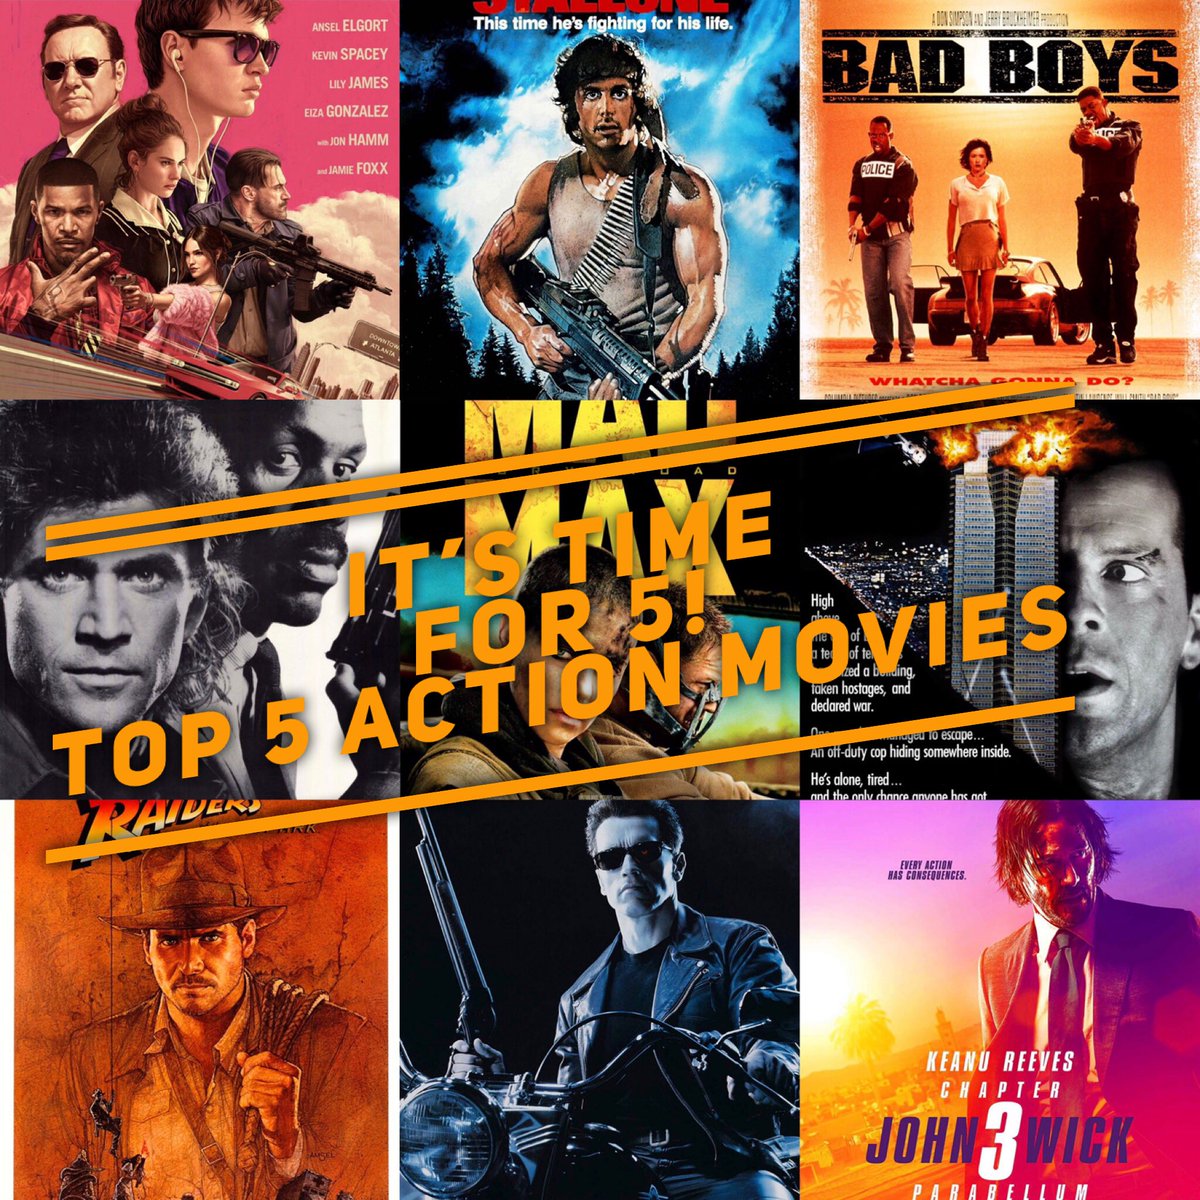 Today at 3pm cst we discuss our Top 5 Action Movies